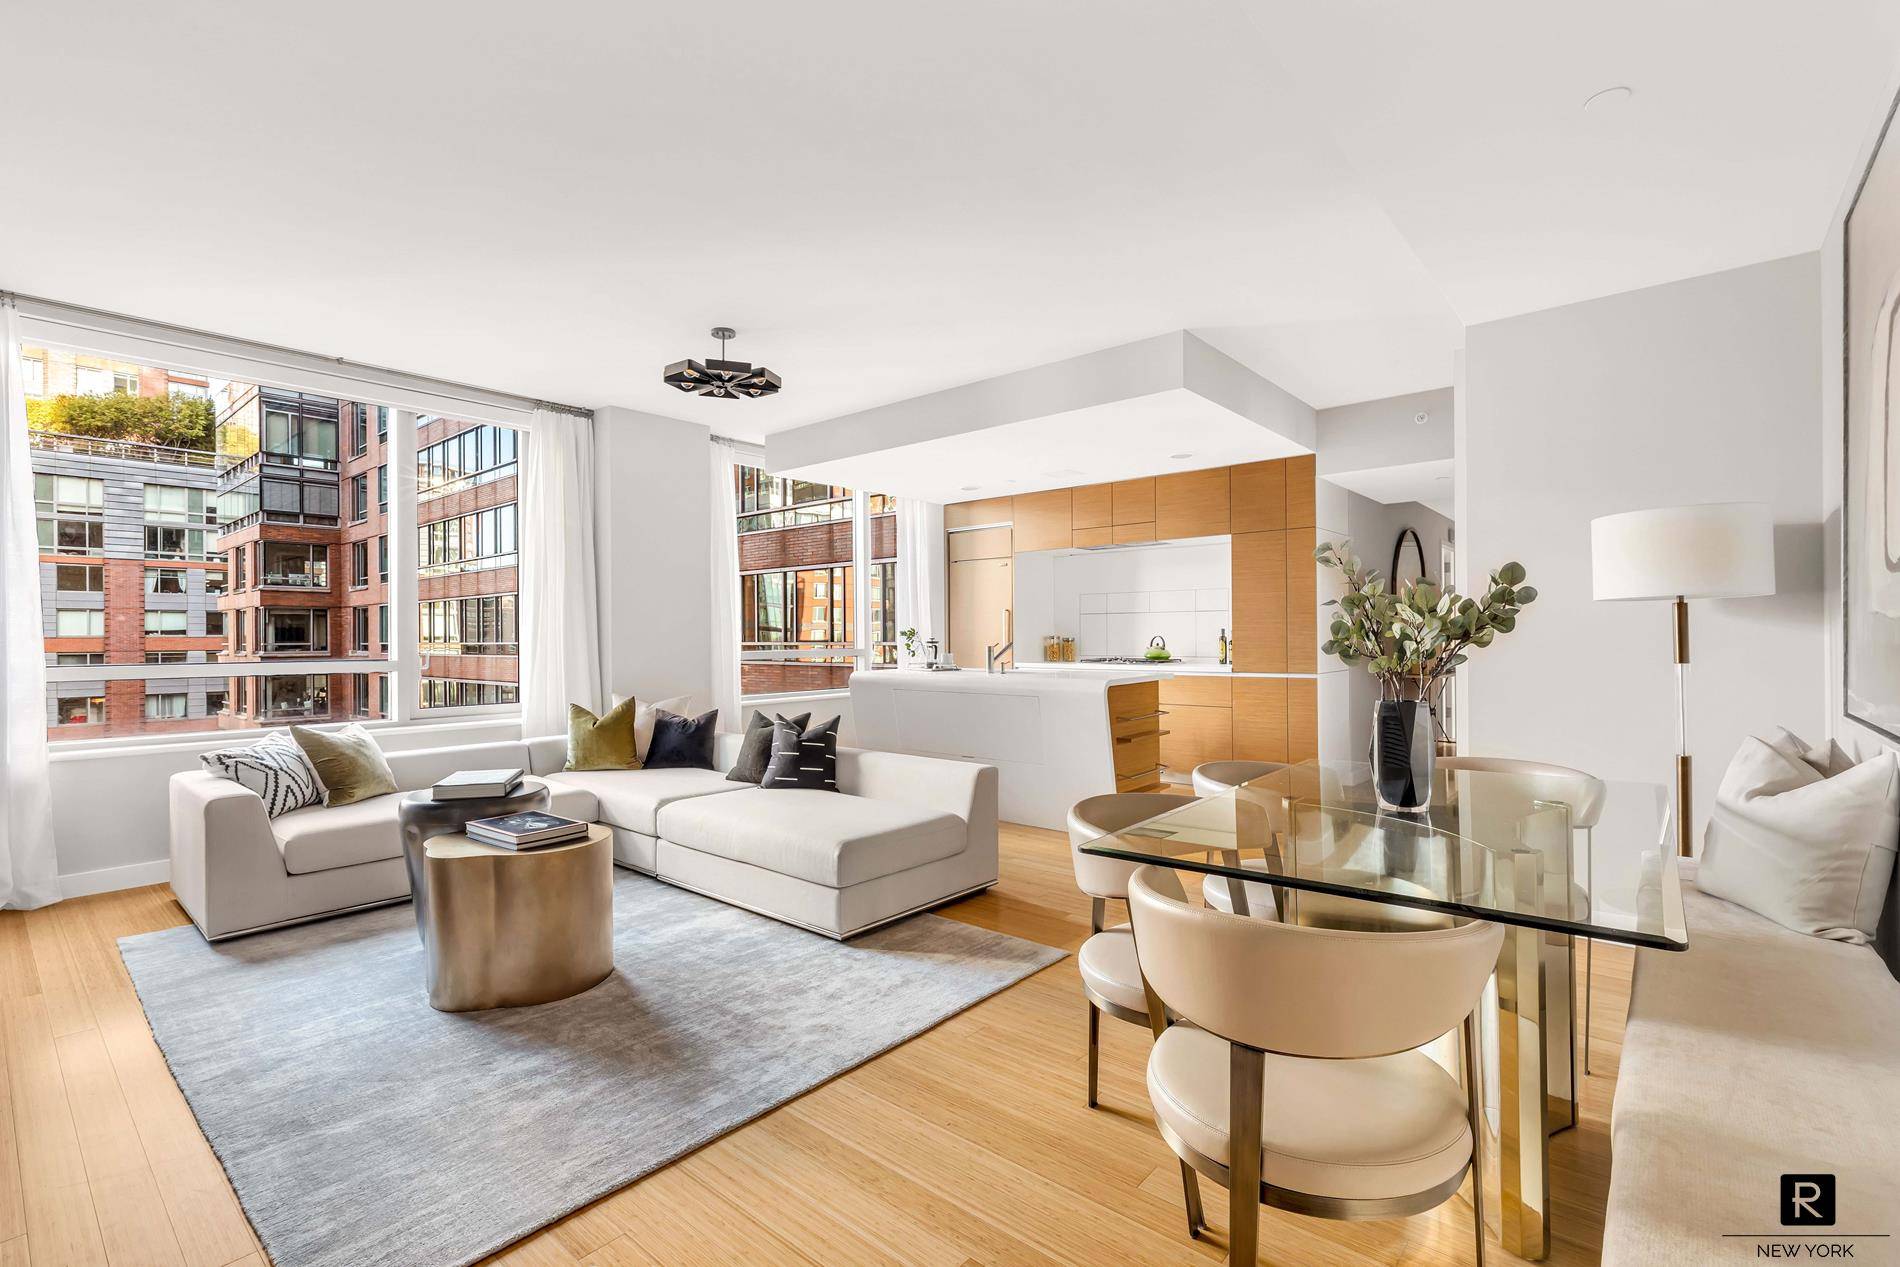 AMAZING OPPORTUNITY... Thoughtfully designed three bedroom two bathroom home available in the Riverhouse, the only water front LEED certified Green condominium in North Battery Park West Tribeca.